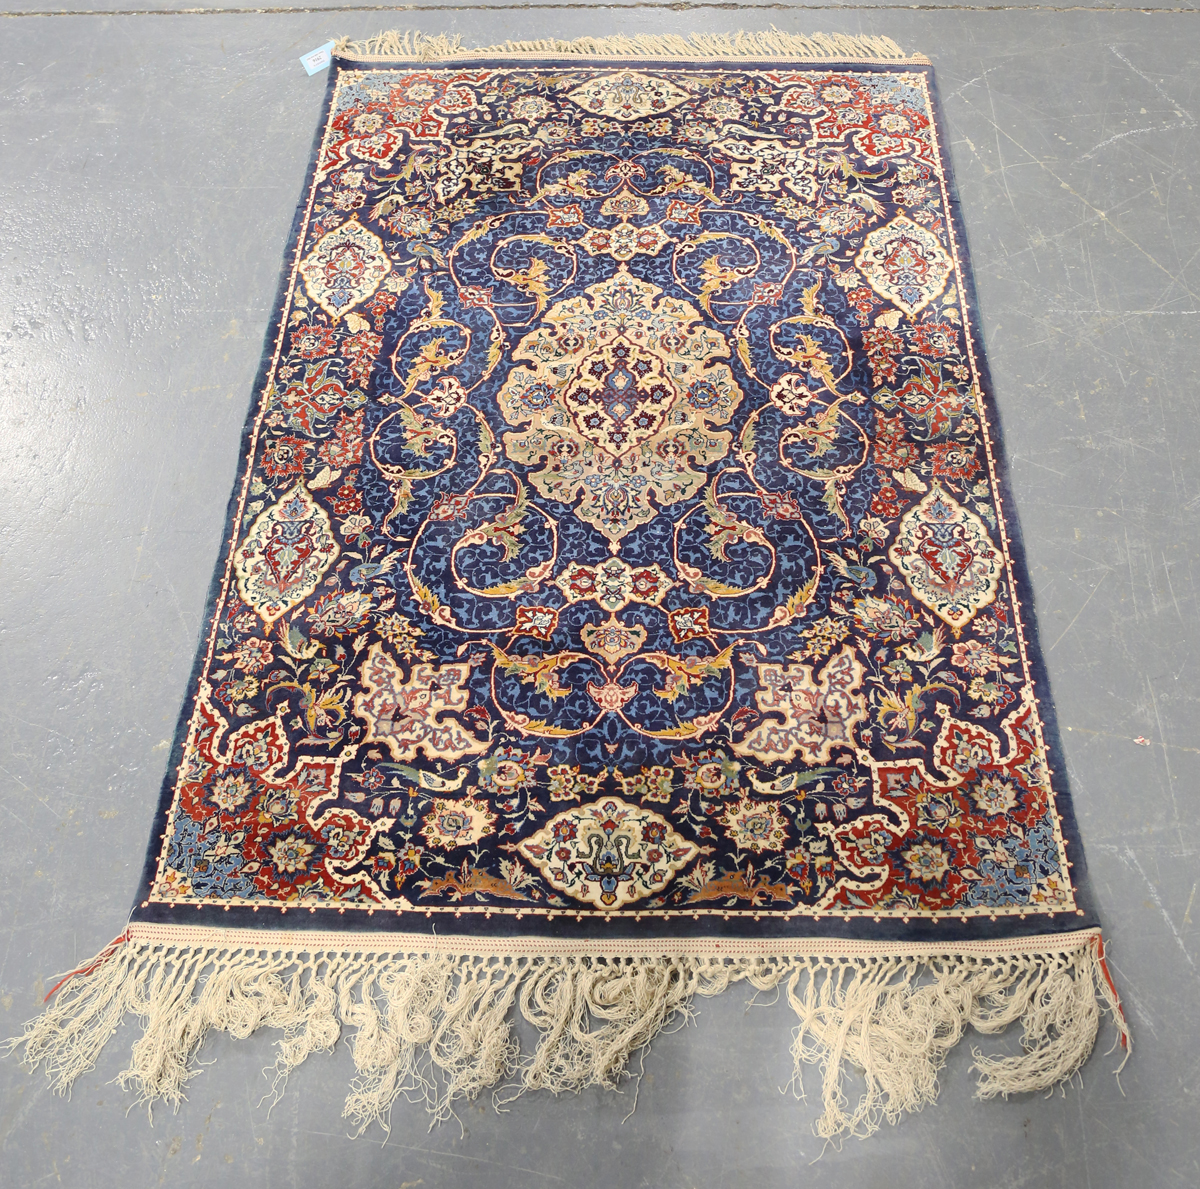 An Esfahan rug, Central Persia, late 20th century, the blue field with a shaped medallion, within